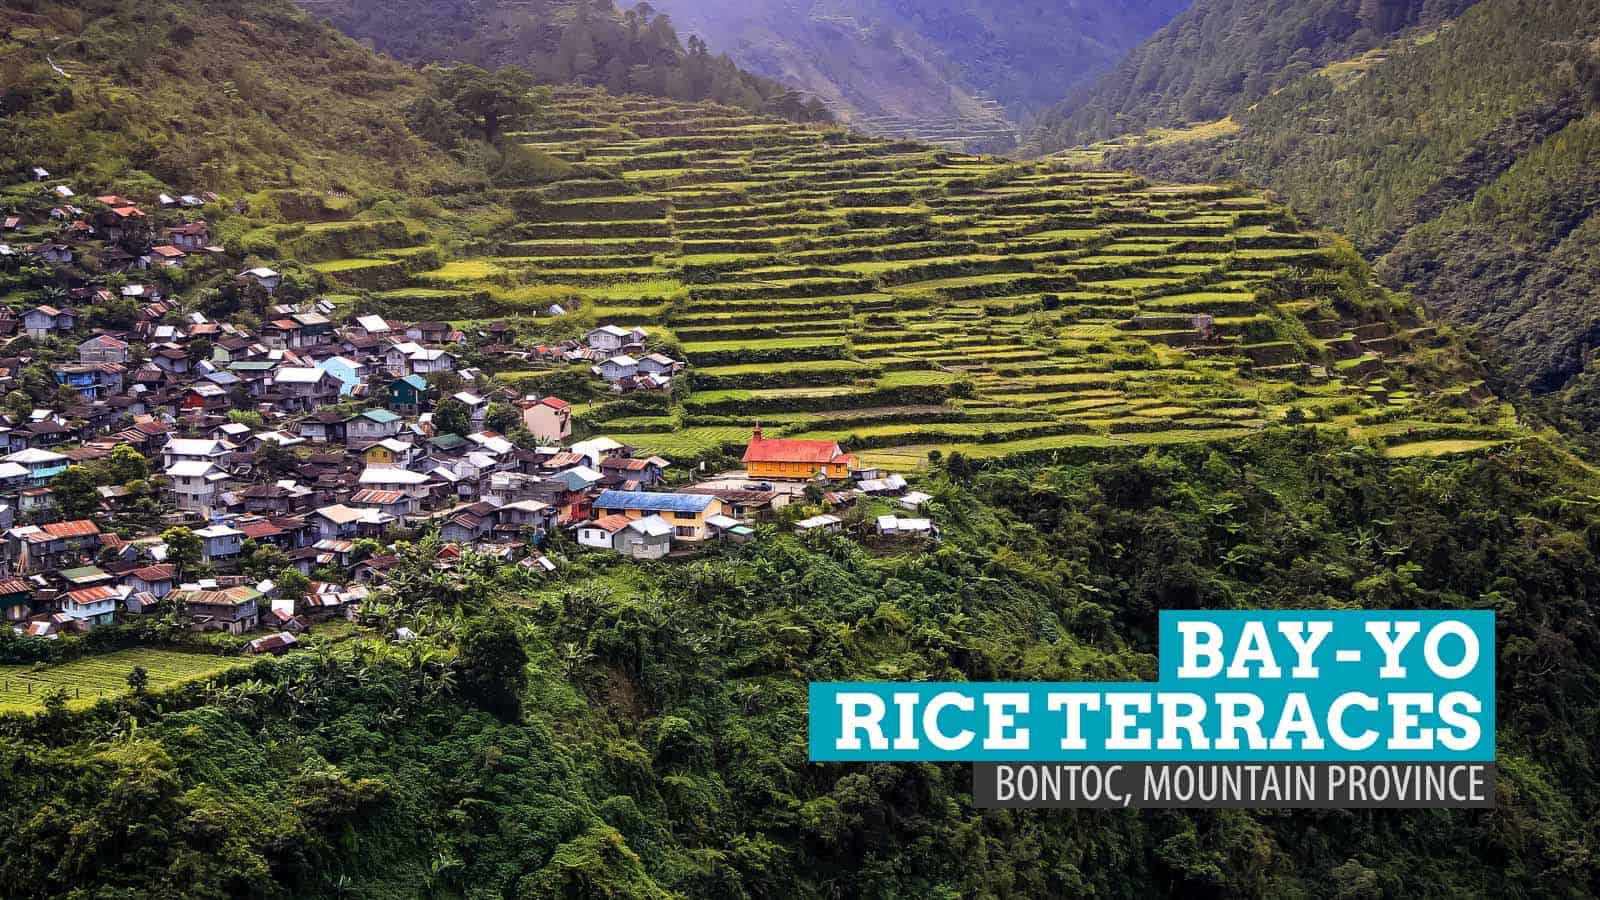 The Bay-yo Rice Terraces and the Mysterious Waterfall: Bontoc, Mountain Province